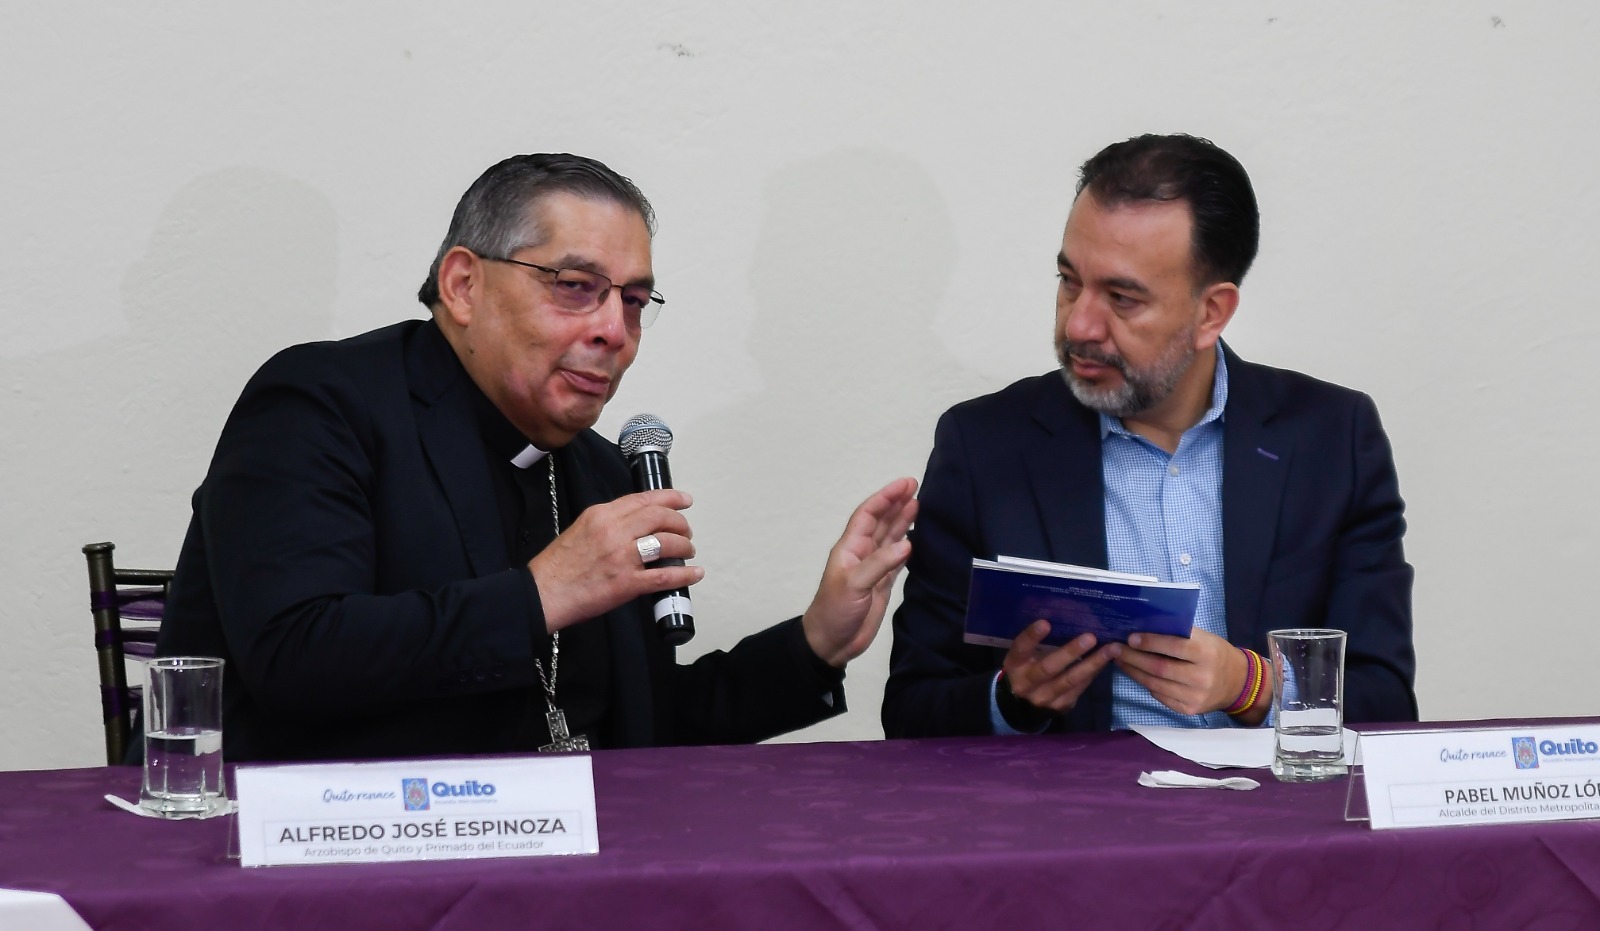 Archbishop delivered the IEC2024 Base Document to the Mayor of Quito